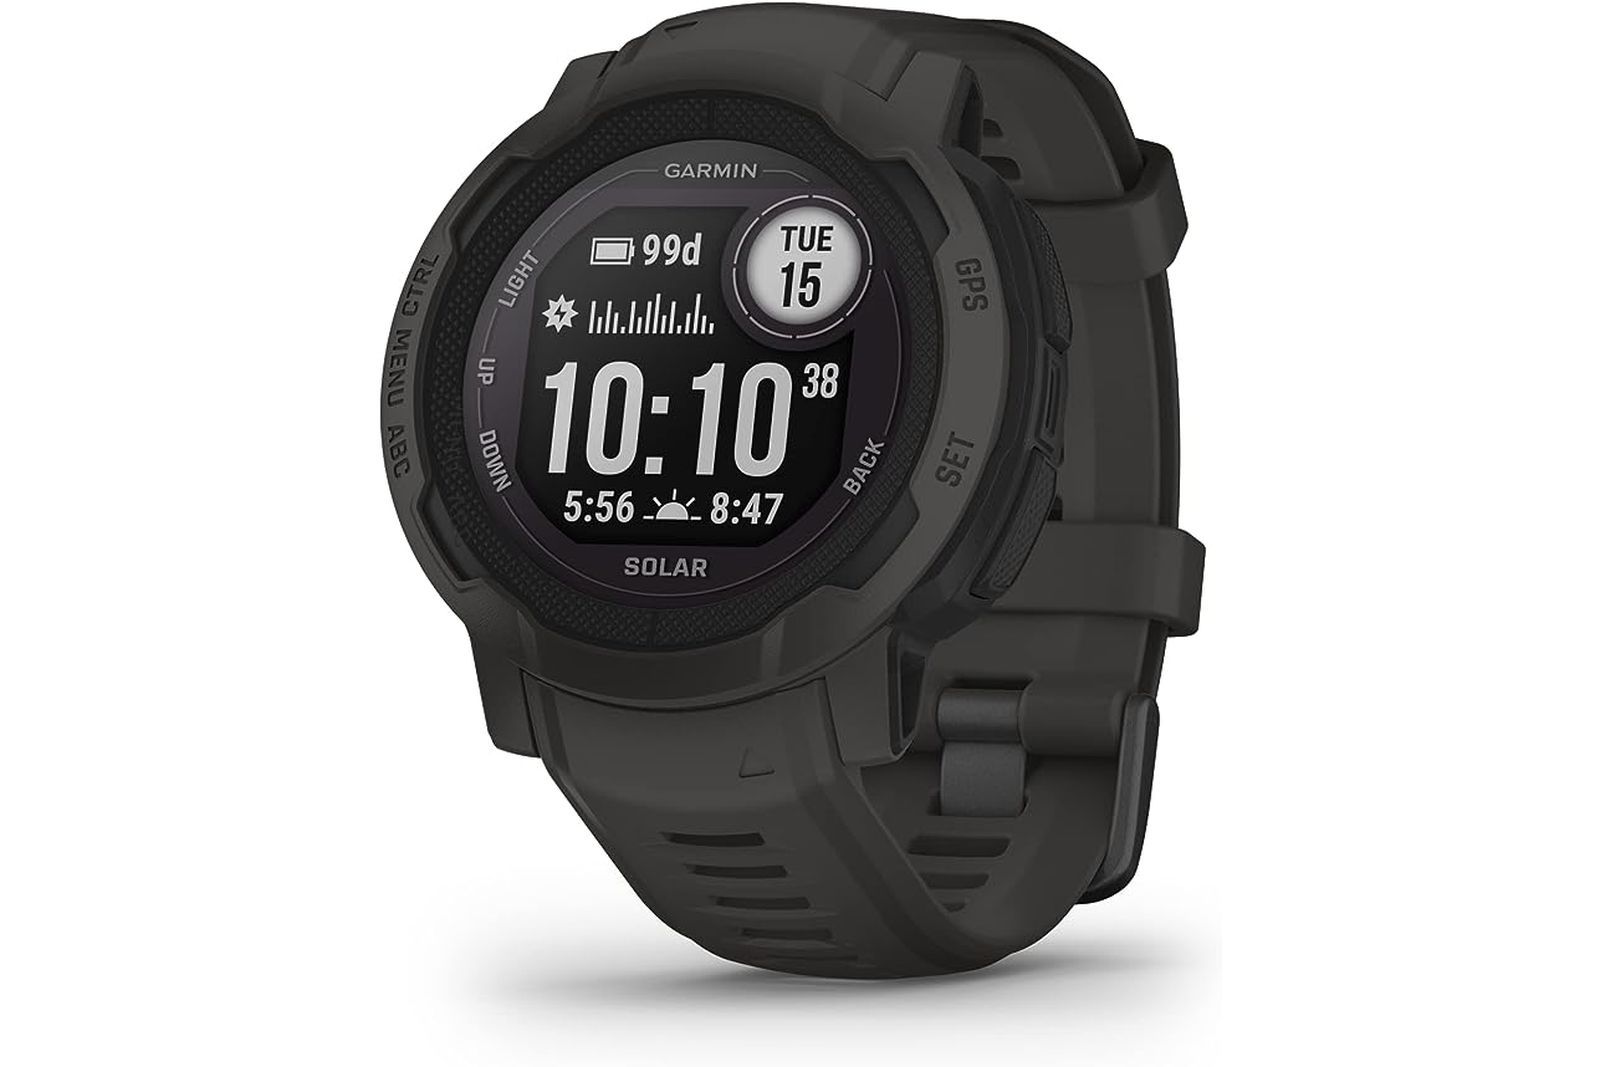 This Garmin watch has longest lasting battery we've tested, and is on sale  at it's lowest price